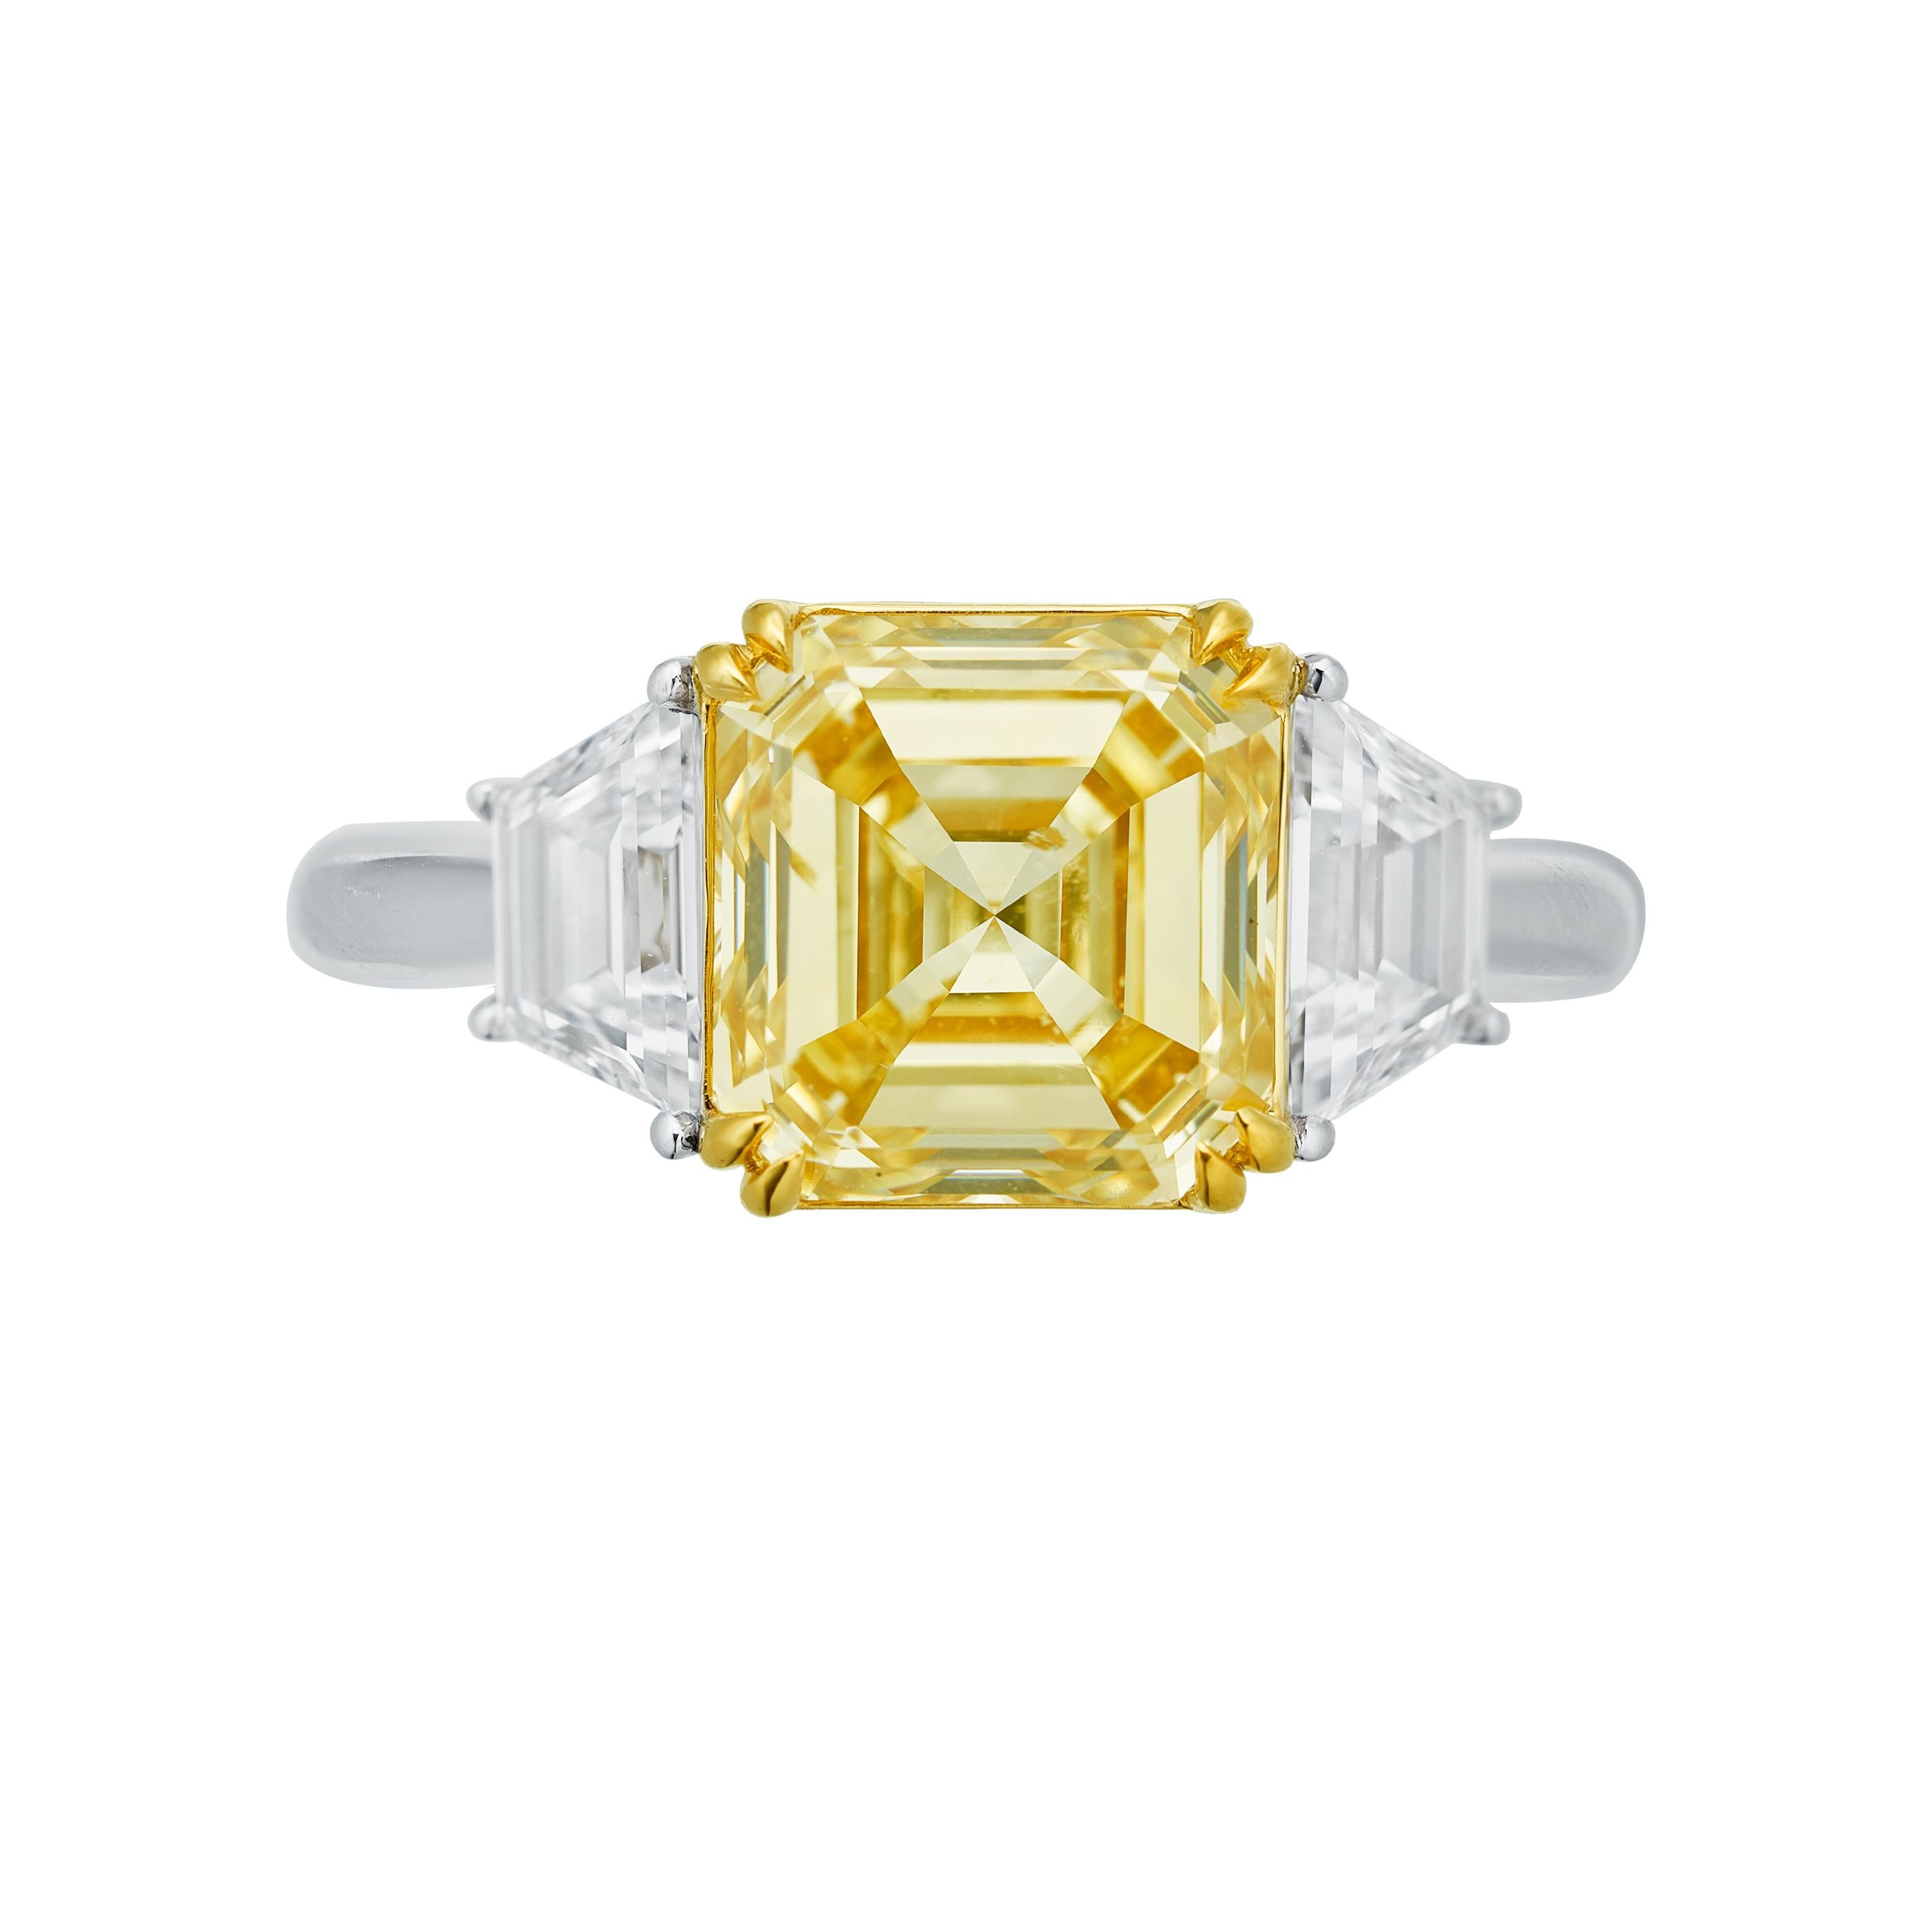 Behold the epitome of love and luxury in this 3.60ct Emerald shape Natural Fancy Yellow diamond ring, an extraordinary symbol of commitment, ideal for weddings and engagements.

At the heart of this masterpiece lies a mesmerizing 3.60ct Emerald